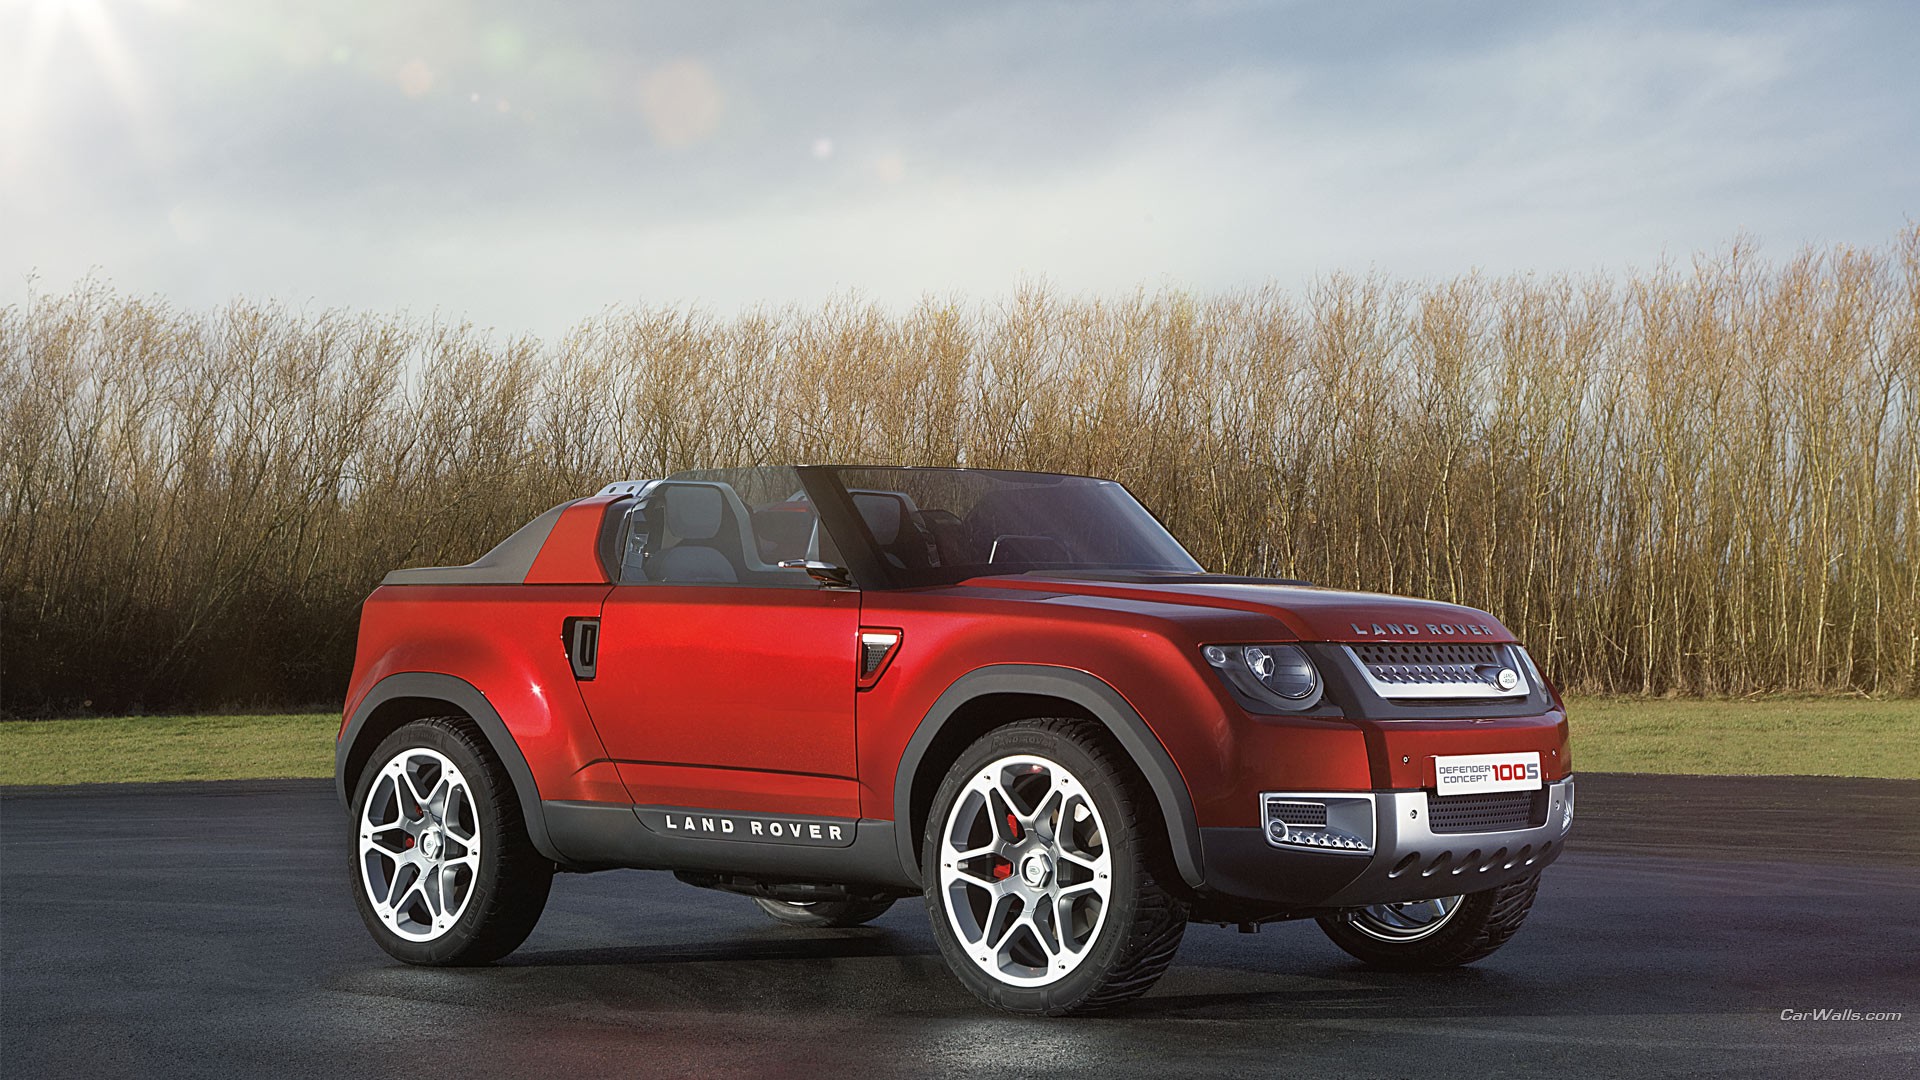 Land Rover DC100, Concept Cars, Red Cars Wallpaper